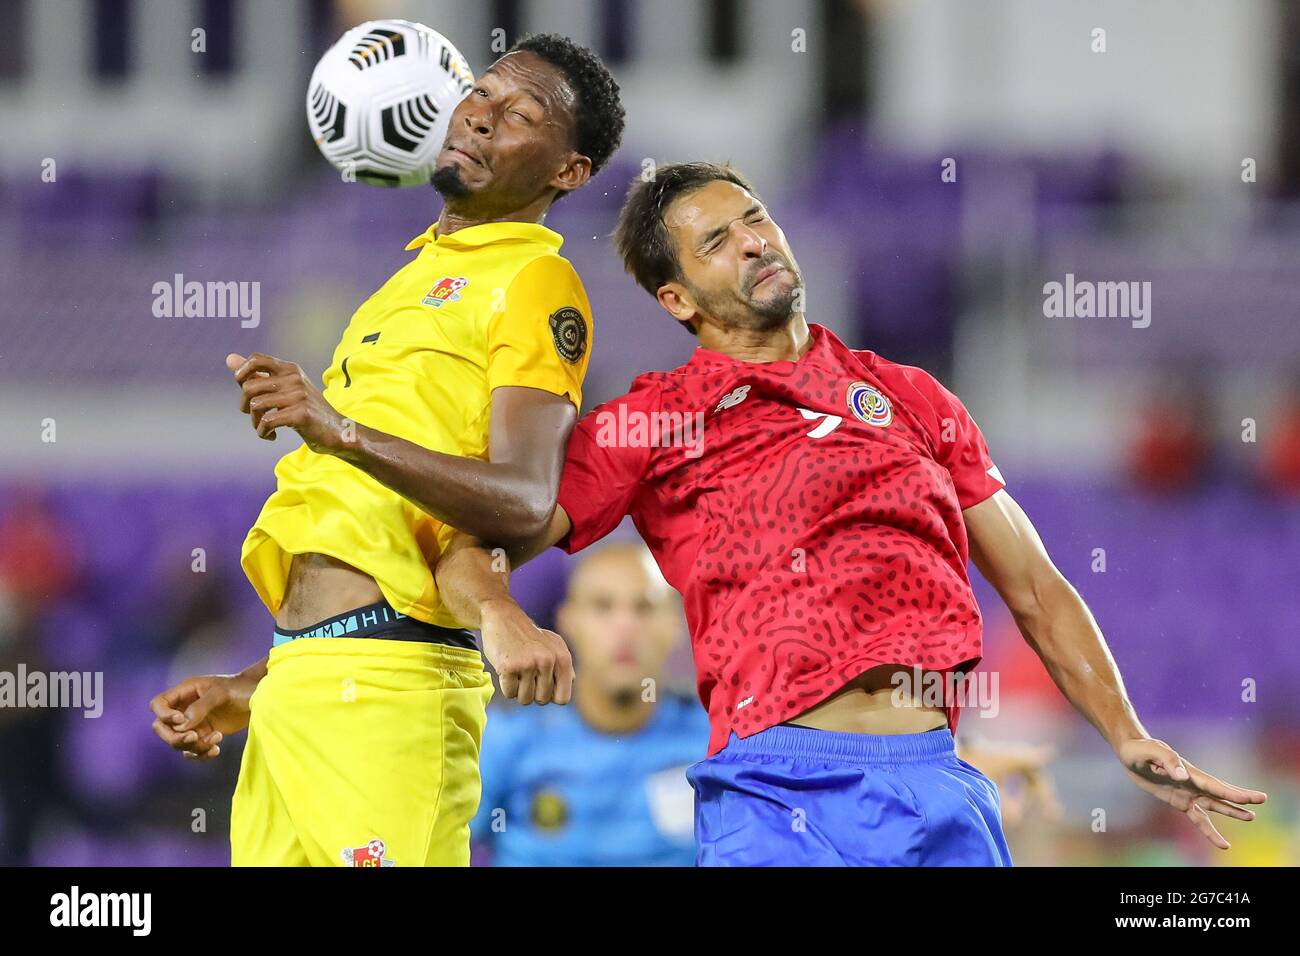 Orlando, Florida, USA. July 12, 2021: Guadeloupe midfielder MAVRICK ANNEROSE (7) gets a header against Costa Rica midfielder CELSO BORGES (5) during the 2021 Concacaf Gold Cup Costa Rica vs Guadeloupe soccer match at Exploria Stadium in Orlando, Fl on July 12, 2021. Credit: Cory Knowlton/ZUMA Wire/Alamy Live News Stock Photo